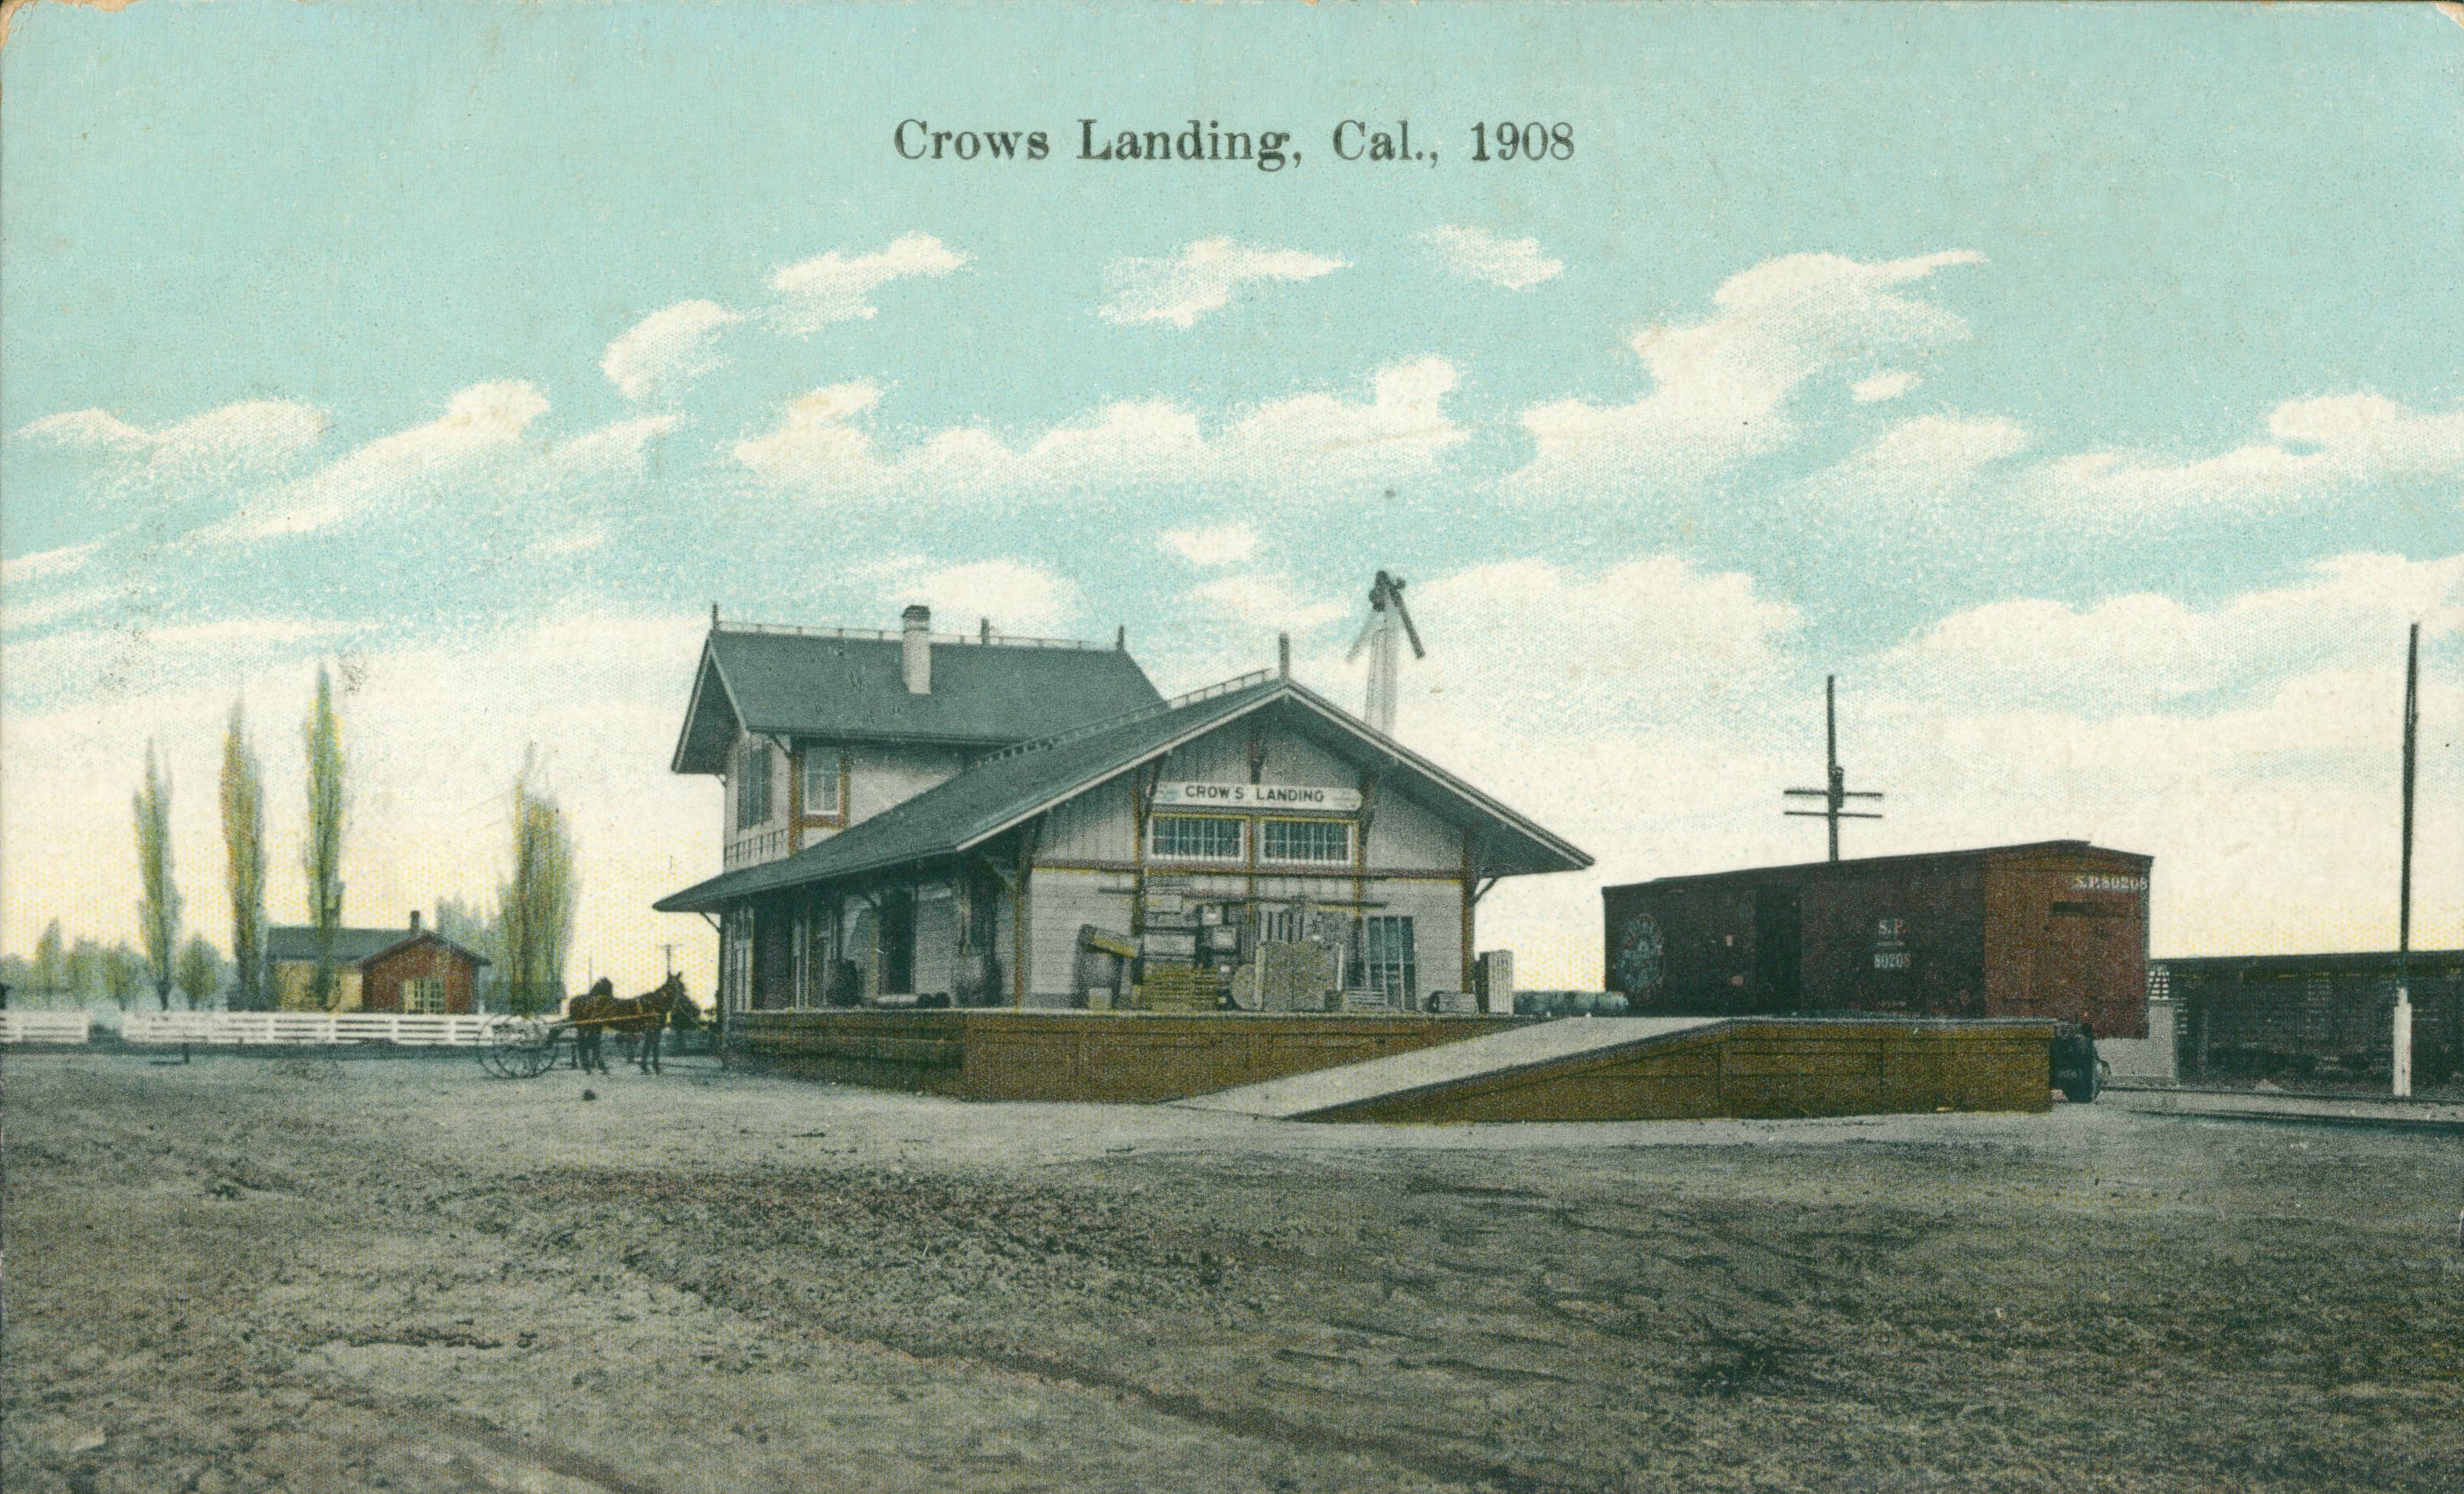 Shows the Crow's Landing railroad tracks and train depot.